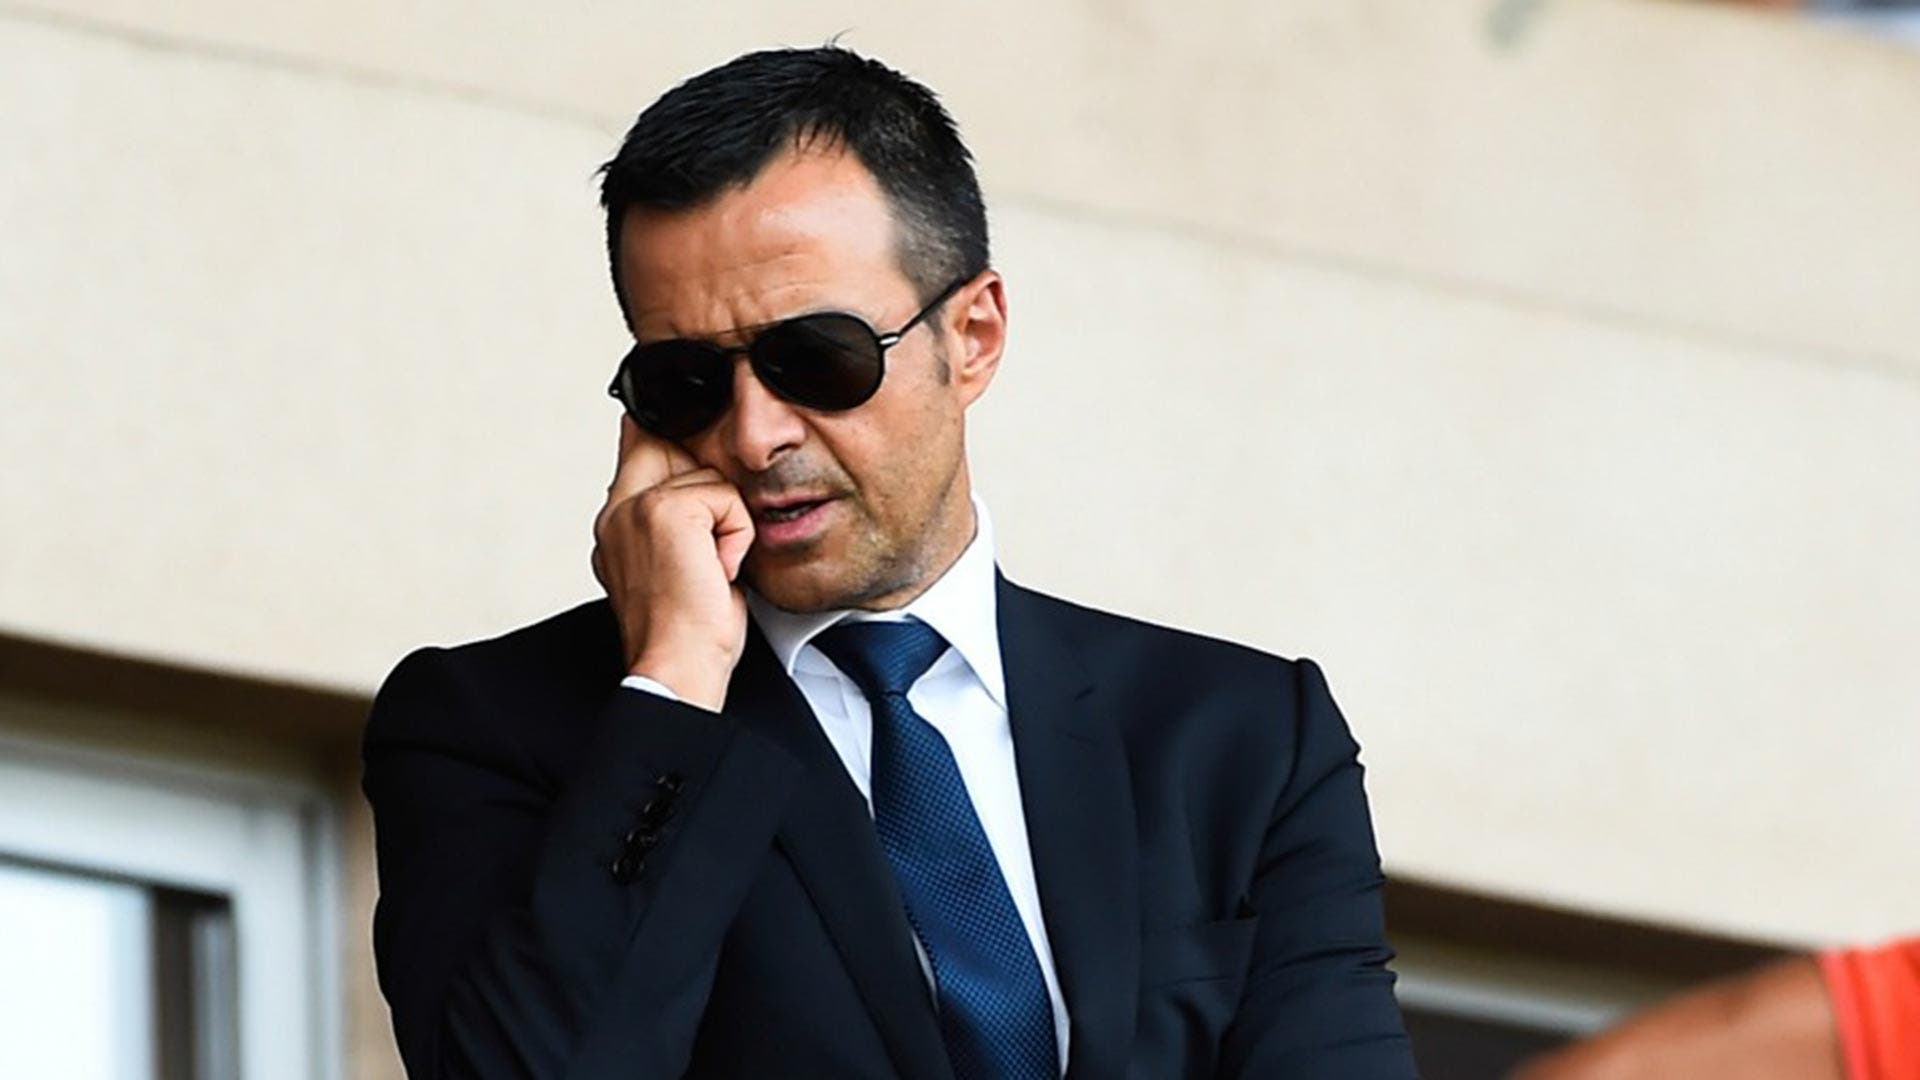 Jorge Mendes endorses Laporta with a free signing for FC Barcelona: Xavi doesn't know anything
	
